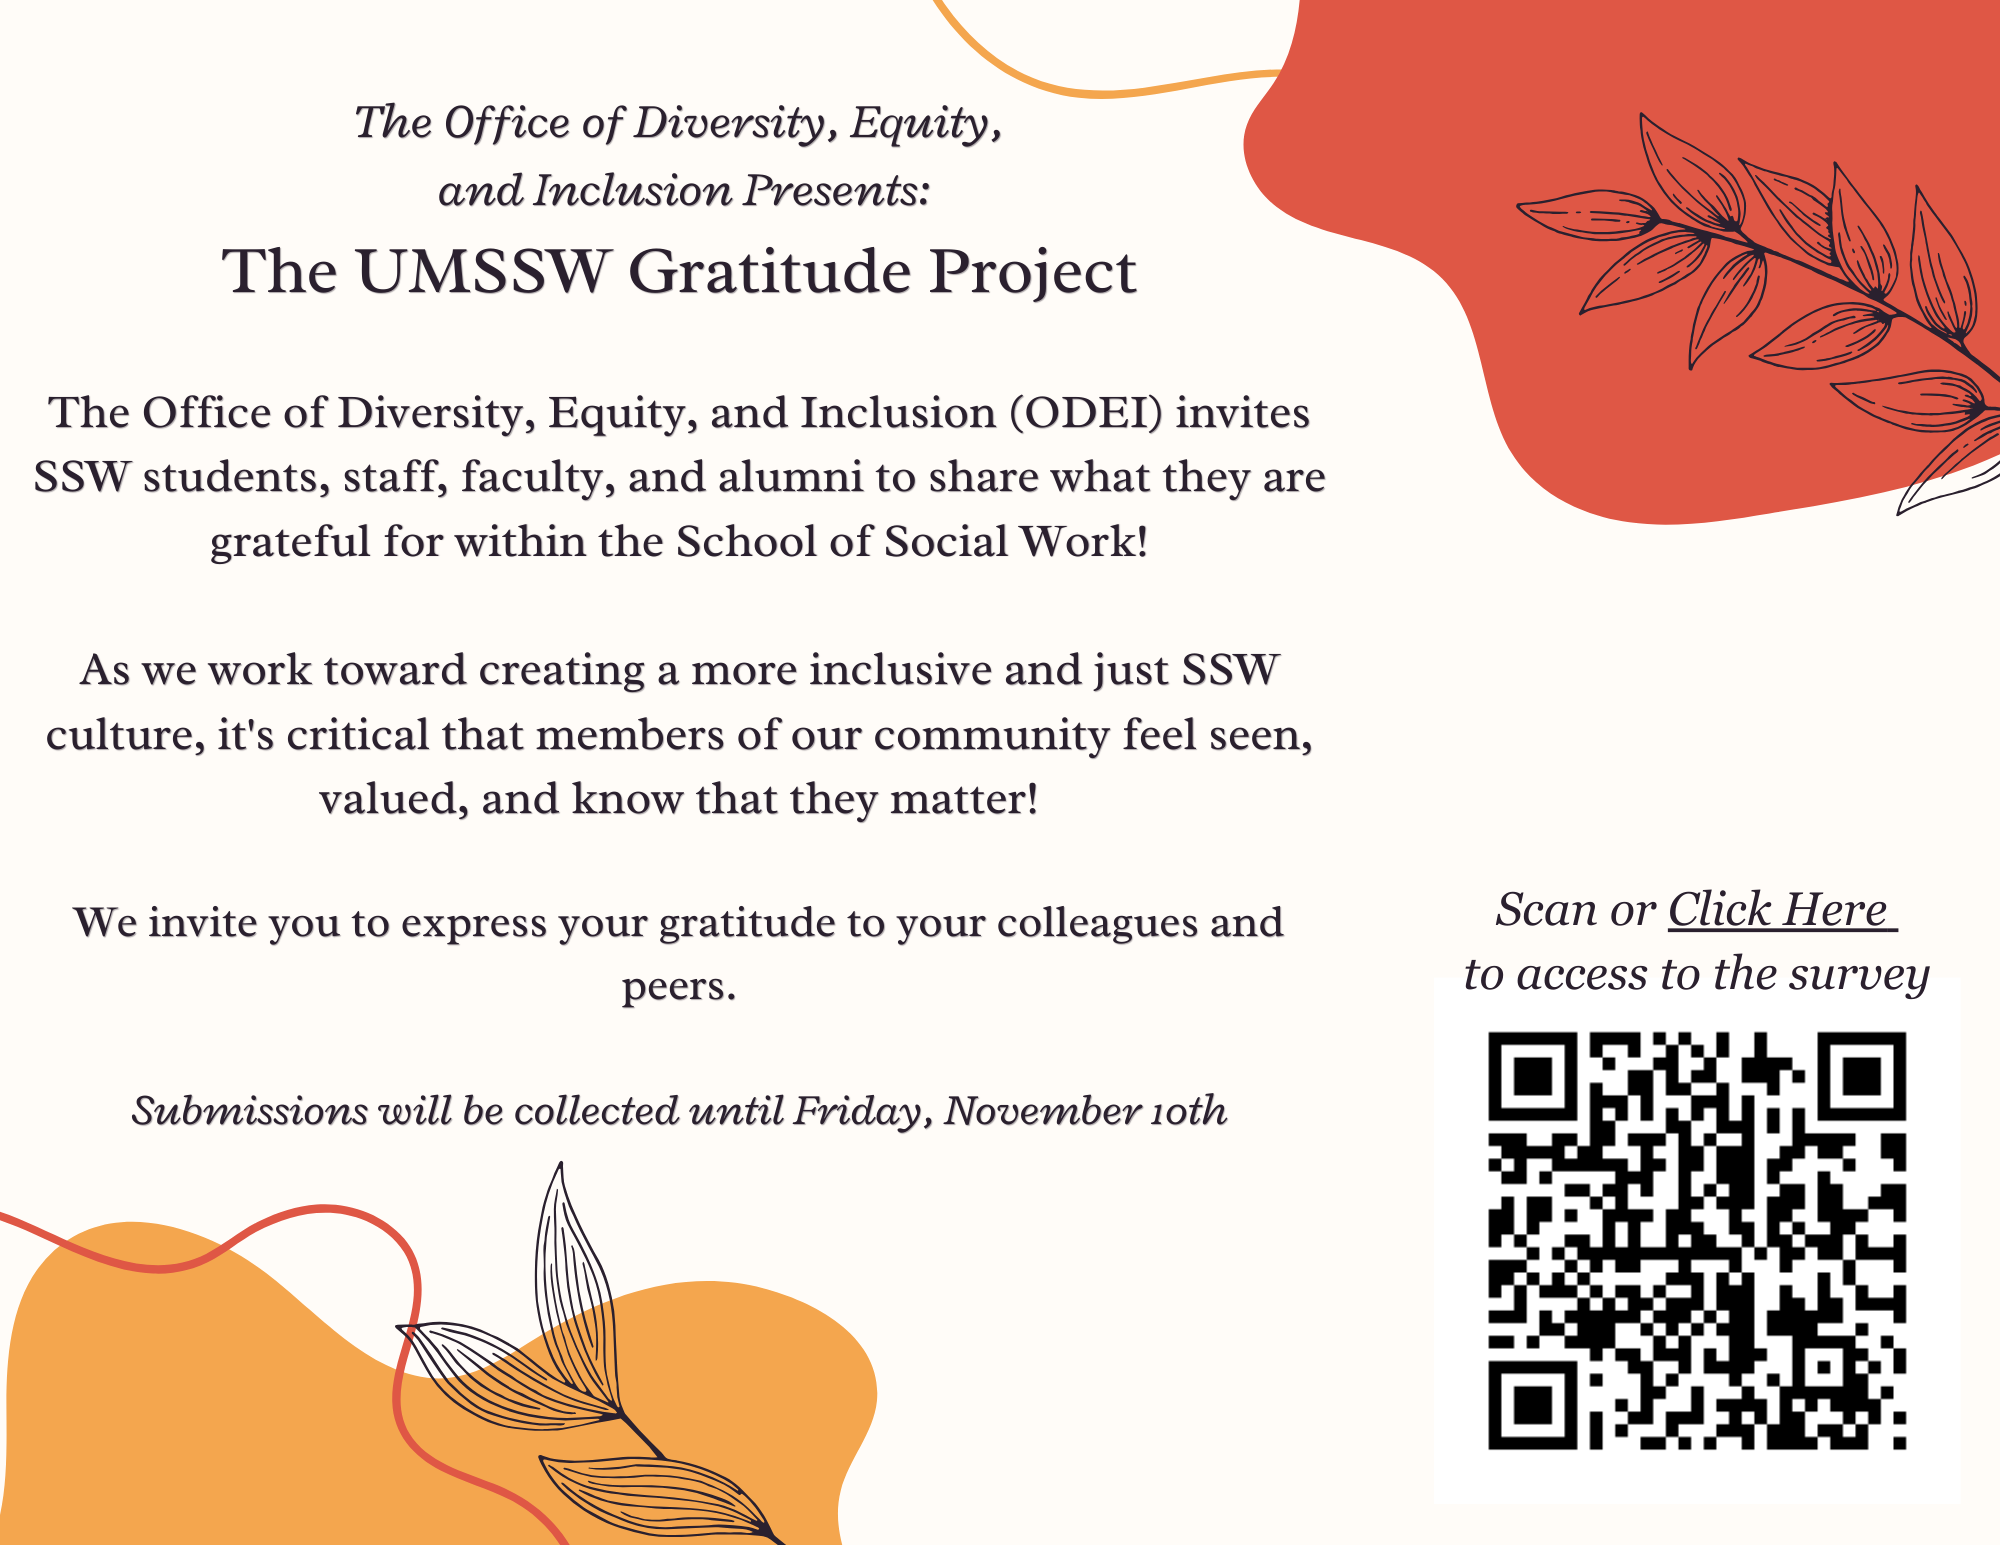 A beige, red, and orange flyer with the same posted language is used to describe the project. A QR code is available on the image to take you to the survey.